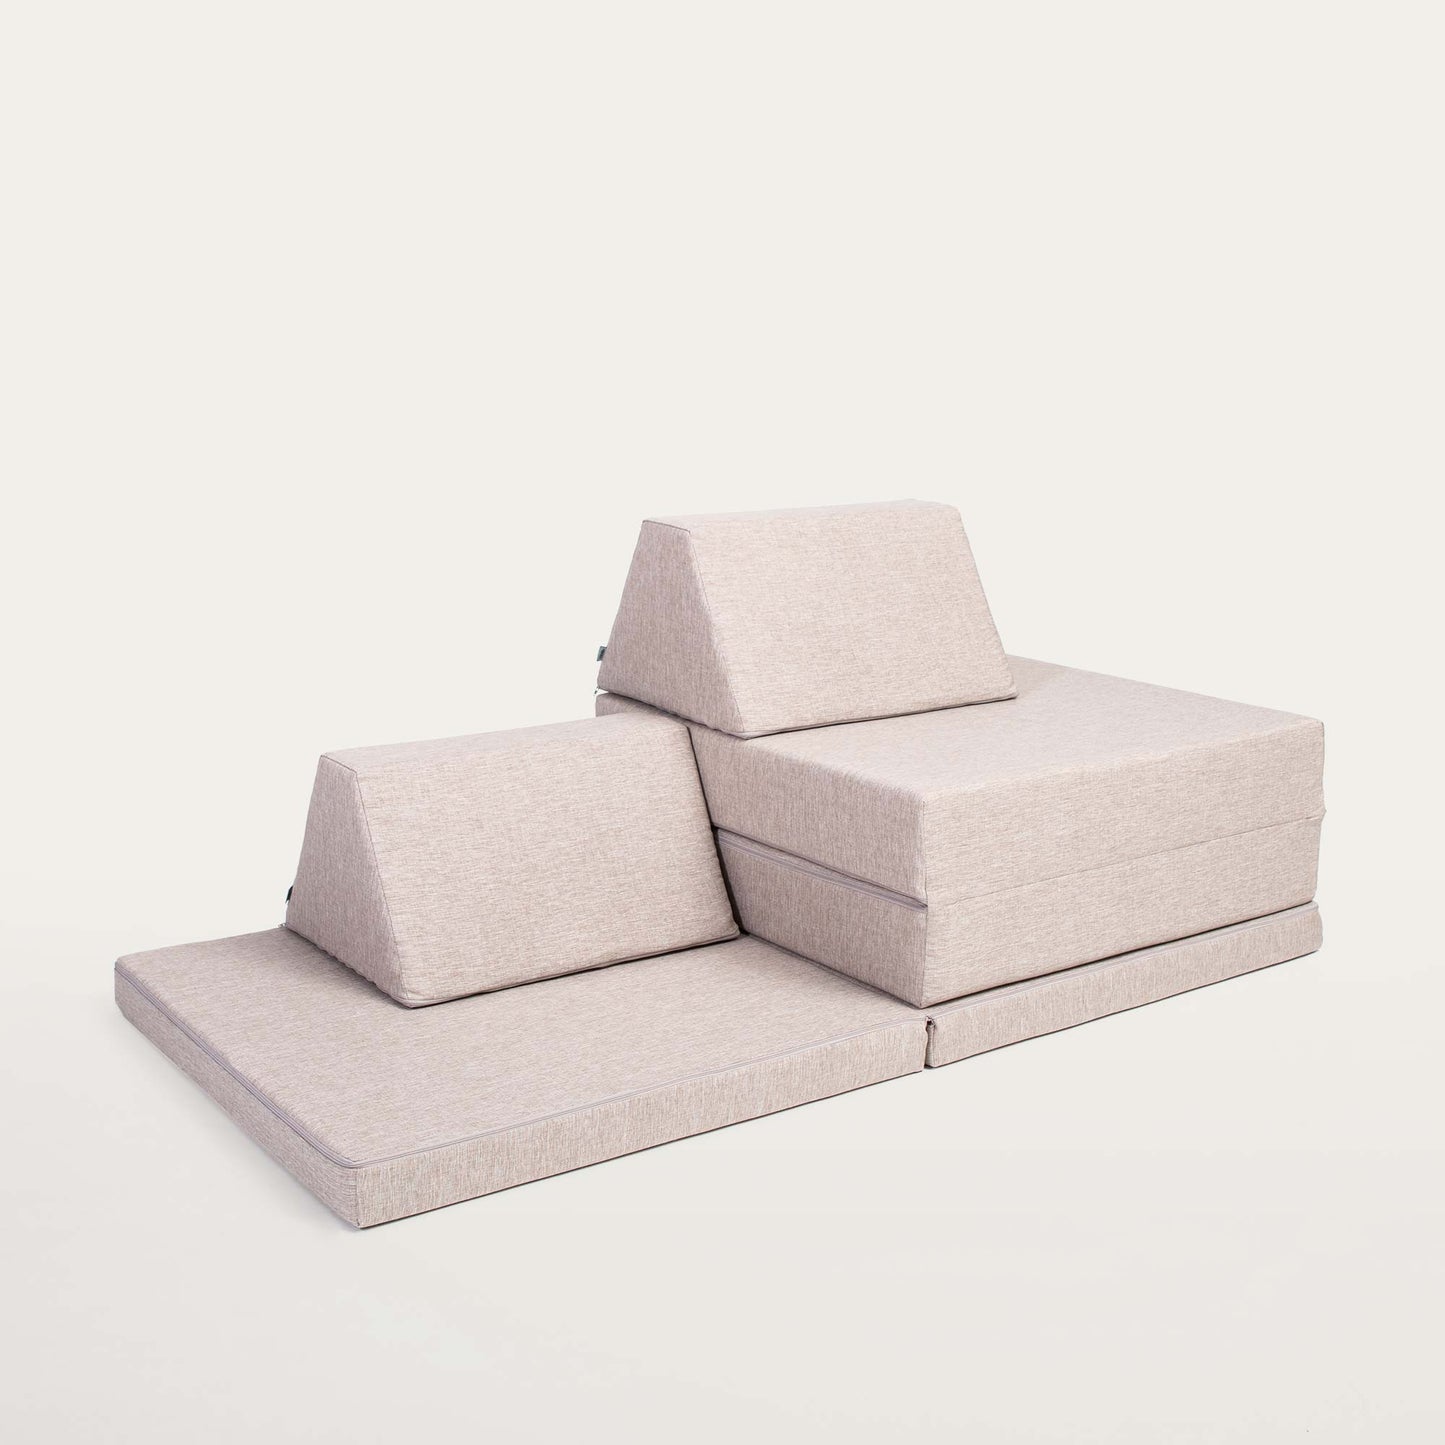 A Beige Monboxy activity sofa set up folded into a two-story seating shape